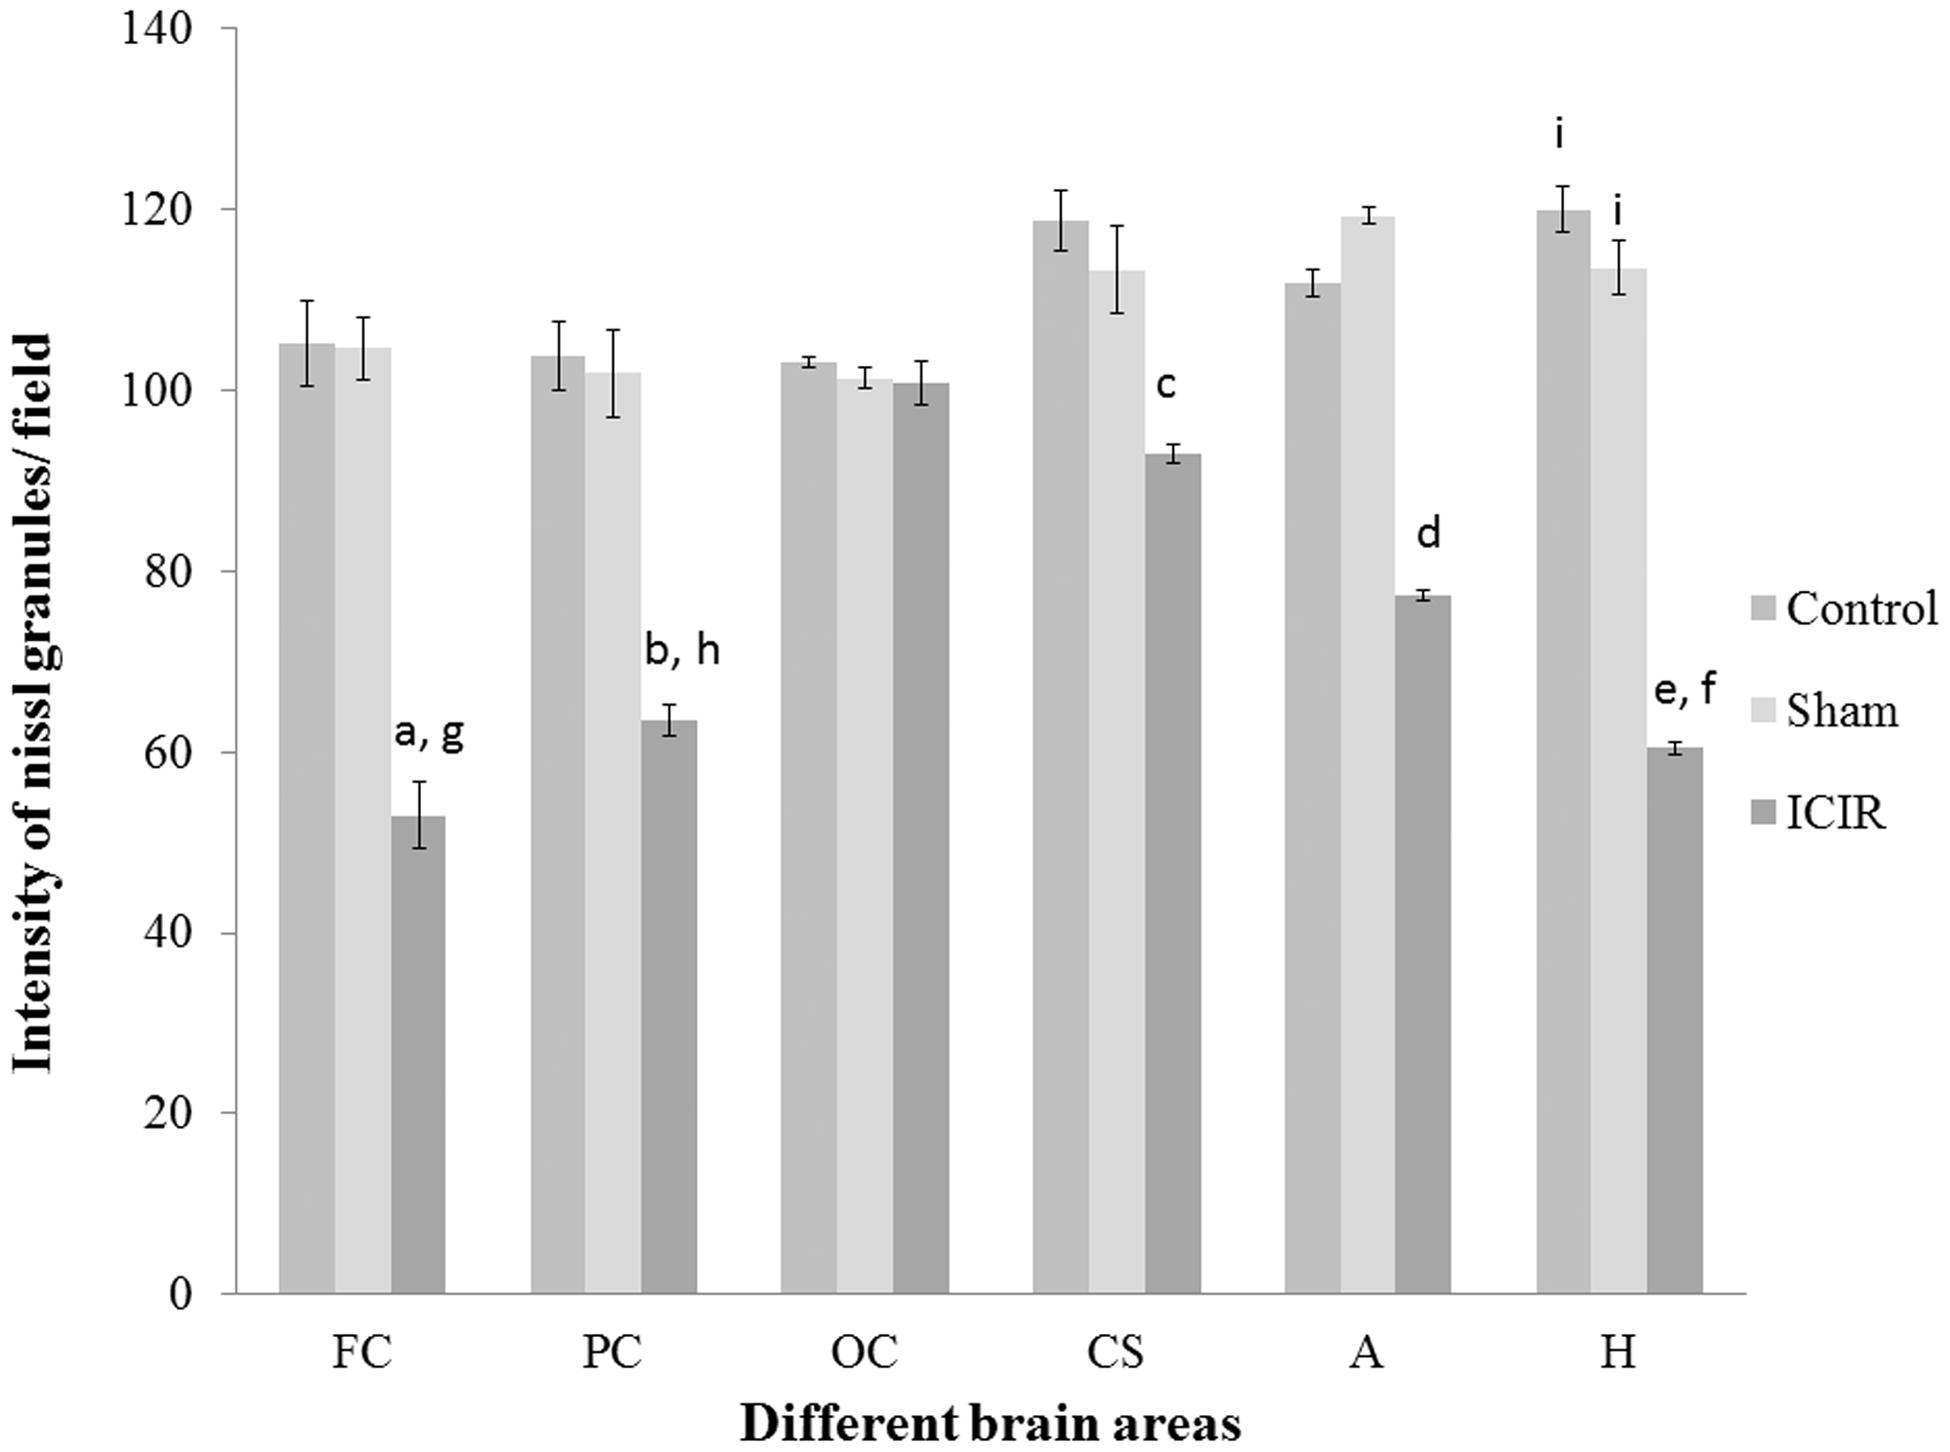 Figure 3. Intensity of Nissl granules in different brain areas of rats. Significant difference (p < 0.001) between control (C)/sham-operated (S) rats vs ICIR hosts in (a) frontal cortex, (b) parietal cortex, (c) corpus striatum, (d) amygdala and (e) hippocampus. In ICIR hosts, significant difference (p < 0.001) between (f) hippocampus/(g) frontal cortex vs amygdala, corpus stratum, occipital cortex. In ICIR hosts, significant difference (p < 0.01) between (h) parietal cortex vs corpus striatum. In control/sham operated hosts, significant difference (p < 0.01) between (i) hippocampus vs frontal, parietal and occipital cortex. A,Amygdala; CS, Corpus striatum; FC, Frontal cortex; H, Hippocampus; OC, Occipital cortex; PC, Parietal cortex. Values shown are means ± SEM (n = 6/group).